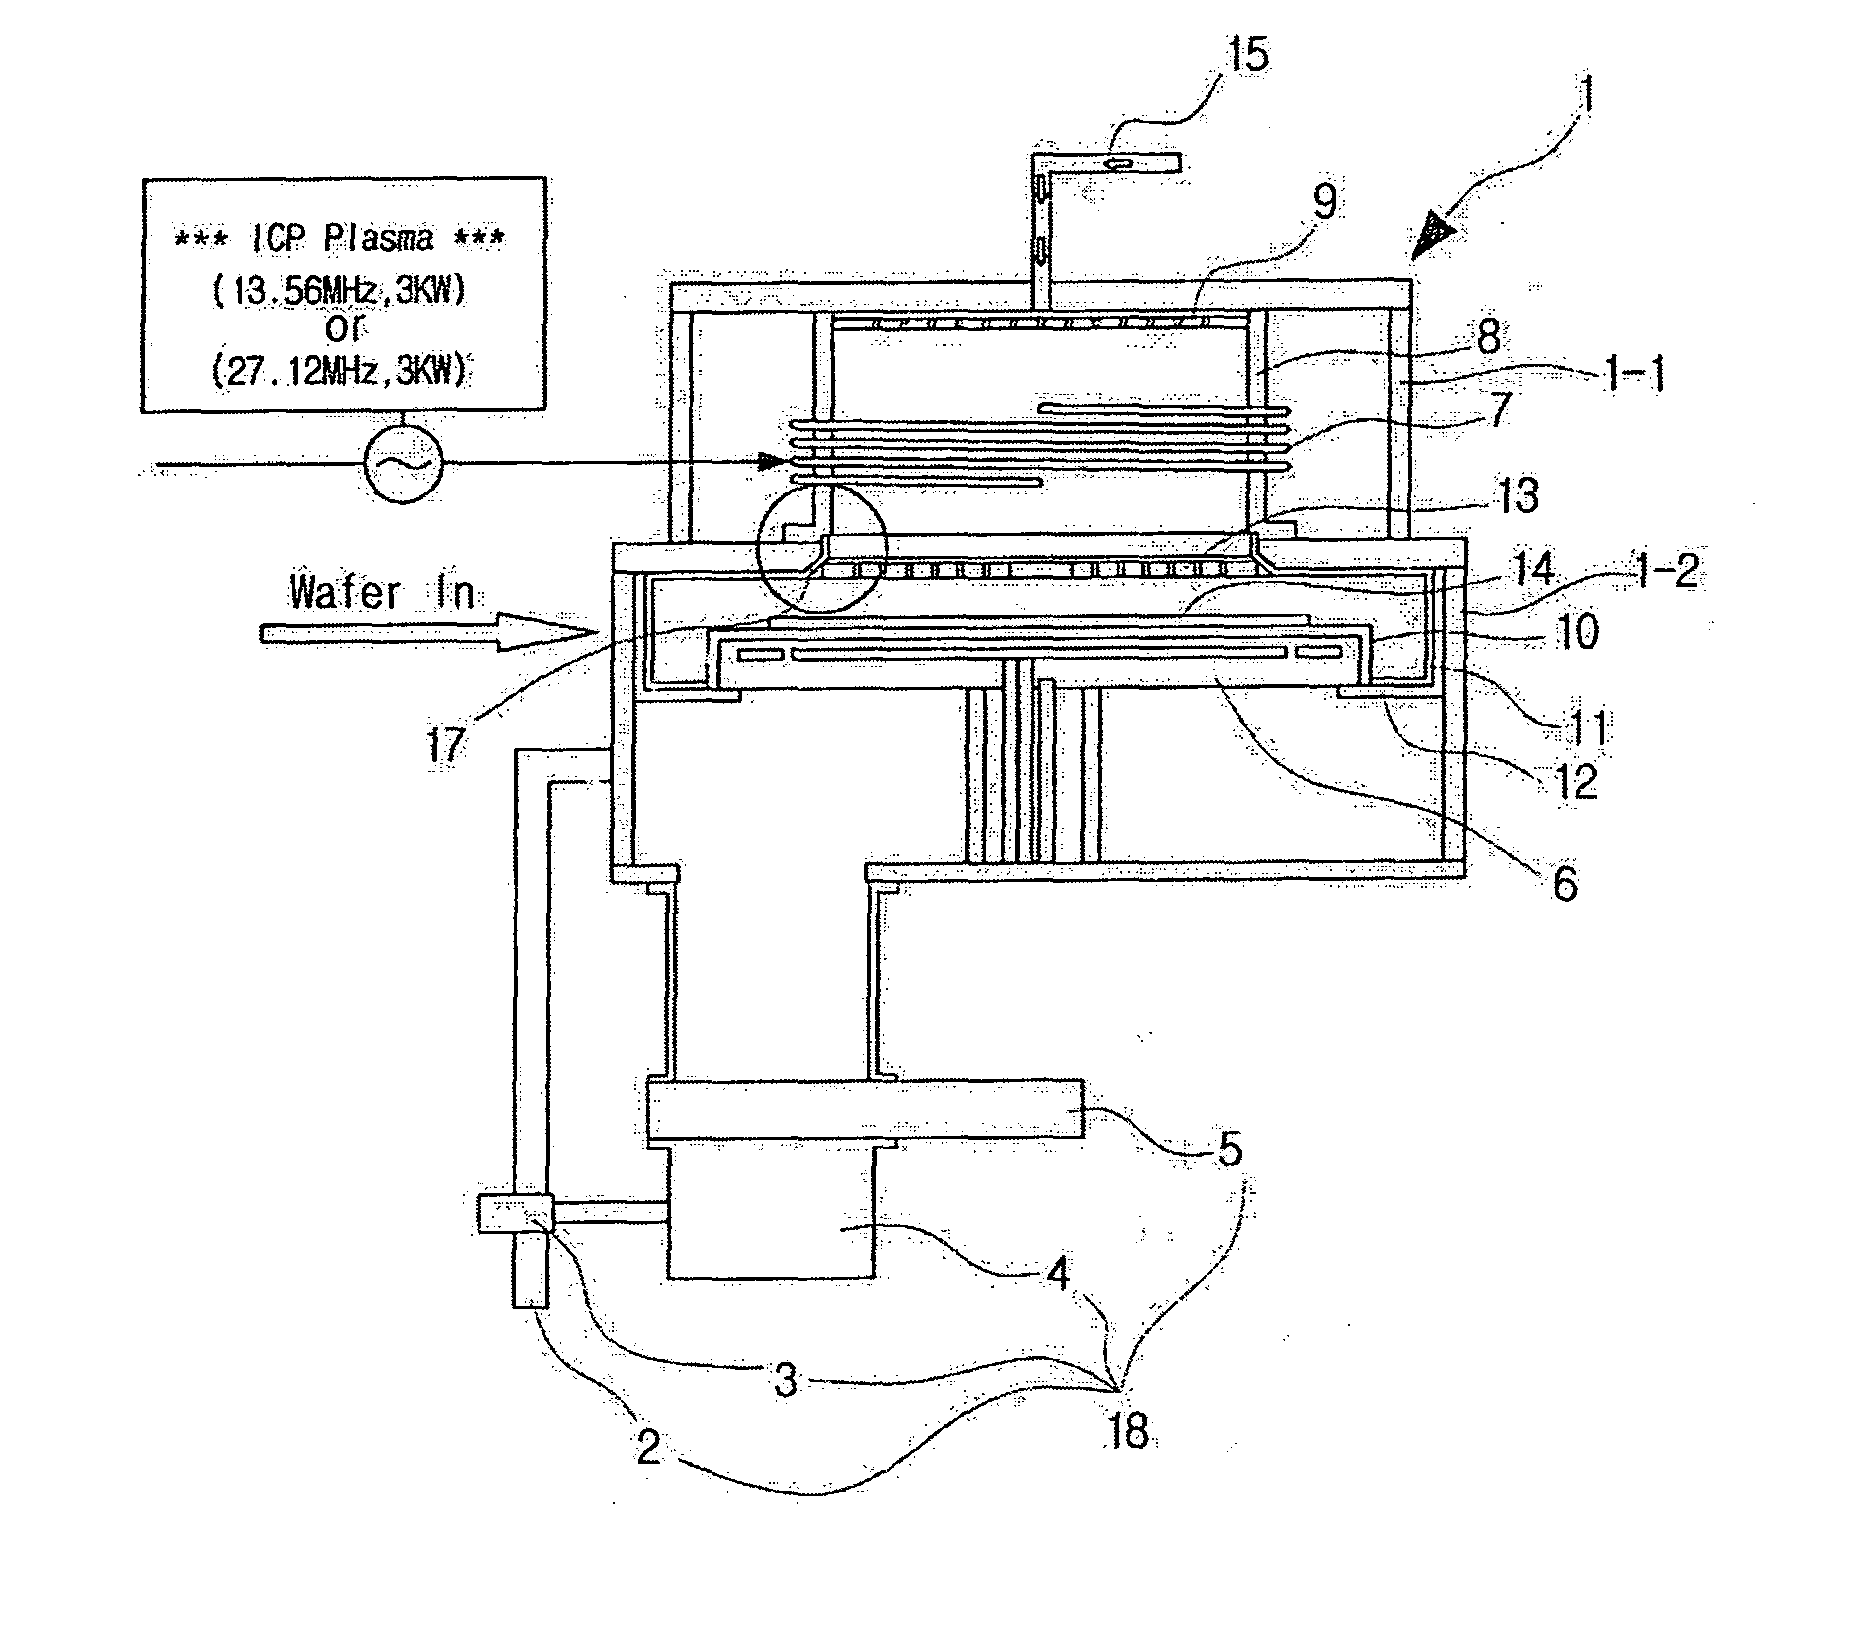 Apparatus for surface-treating wafer using high-frequency inductively-coupled plasma